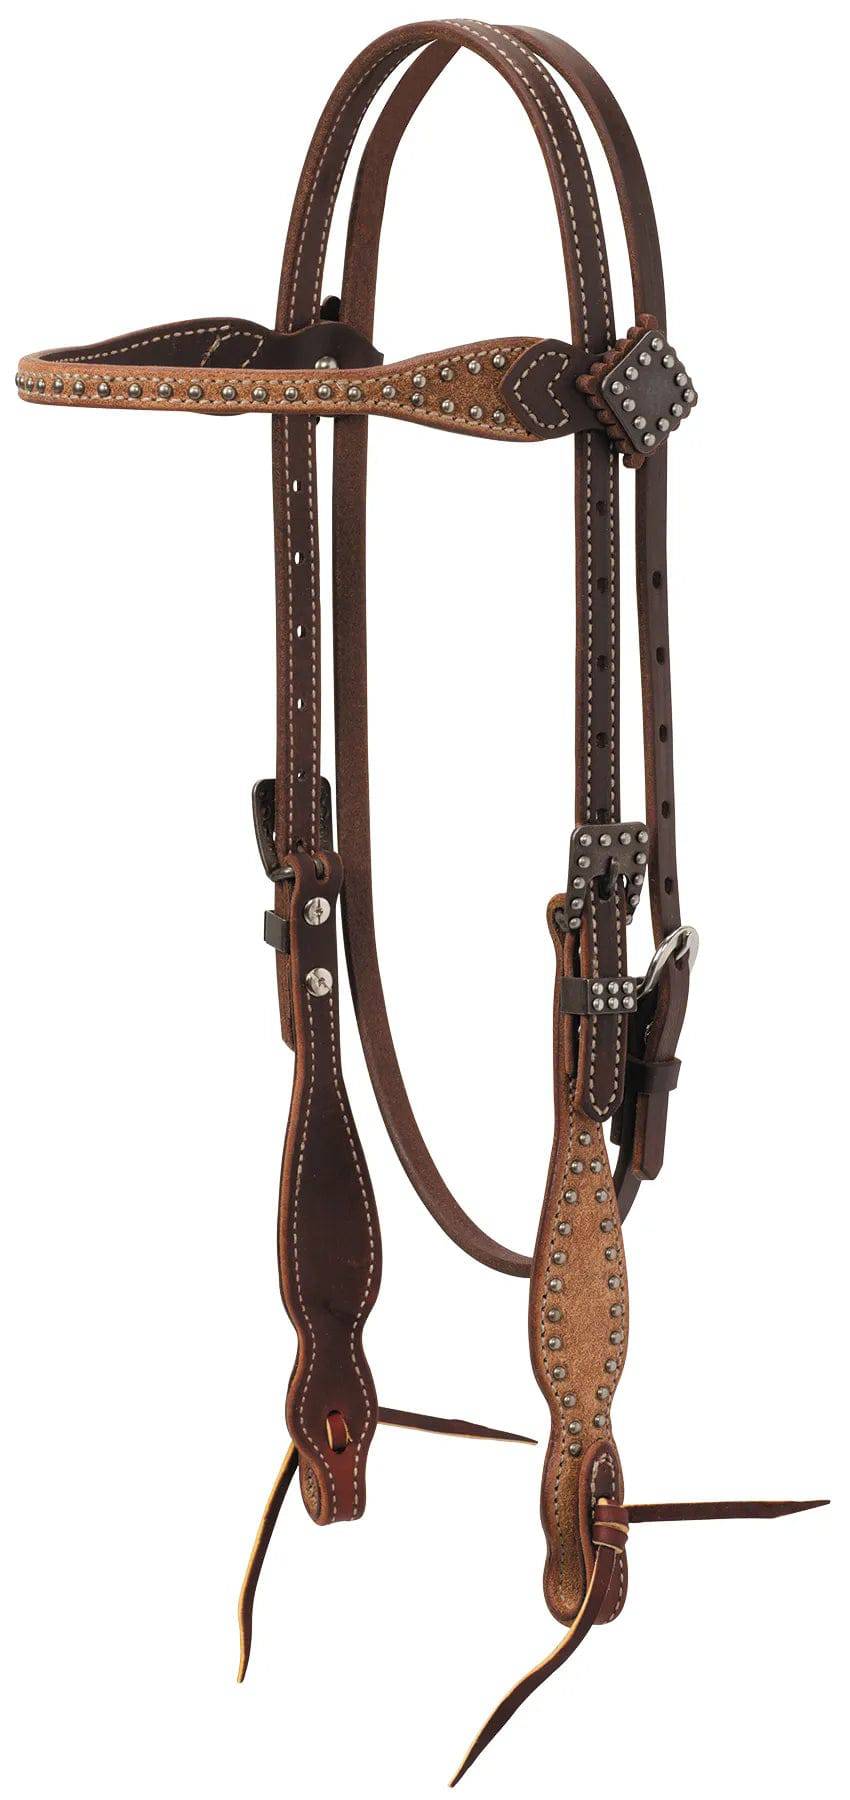 Weaver Canyon Rose Roughout Oiled Browband Headstall - Equine Exchange Tack Shop